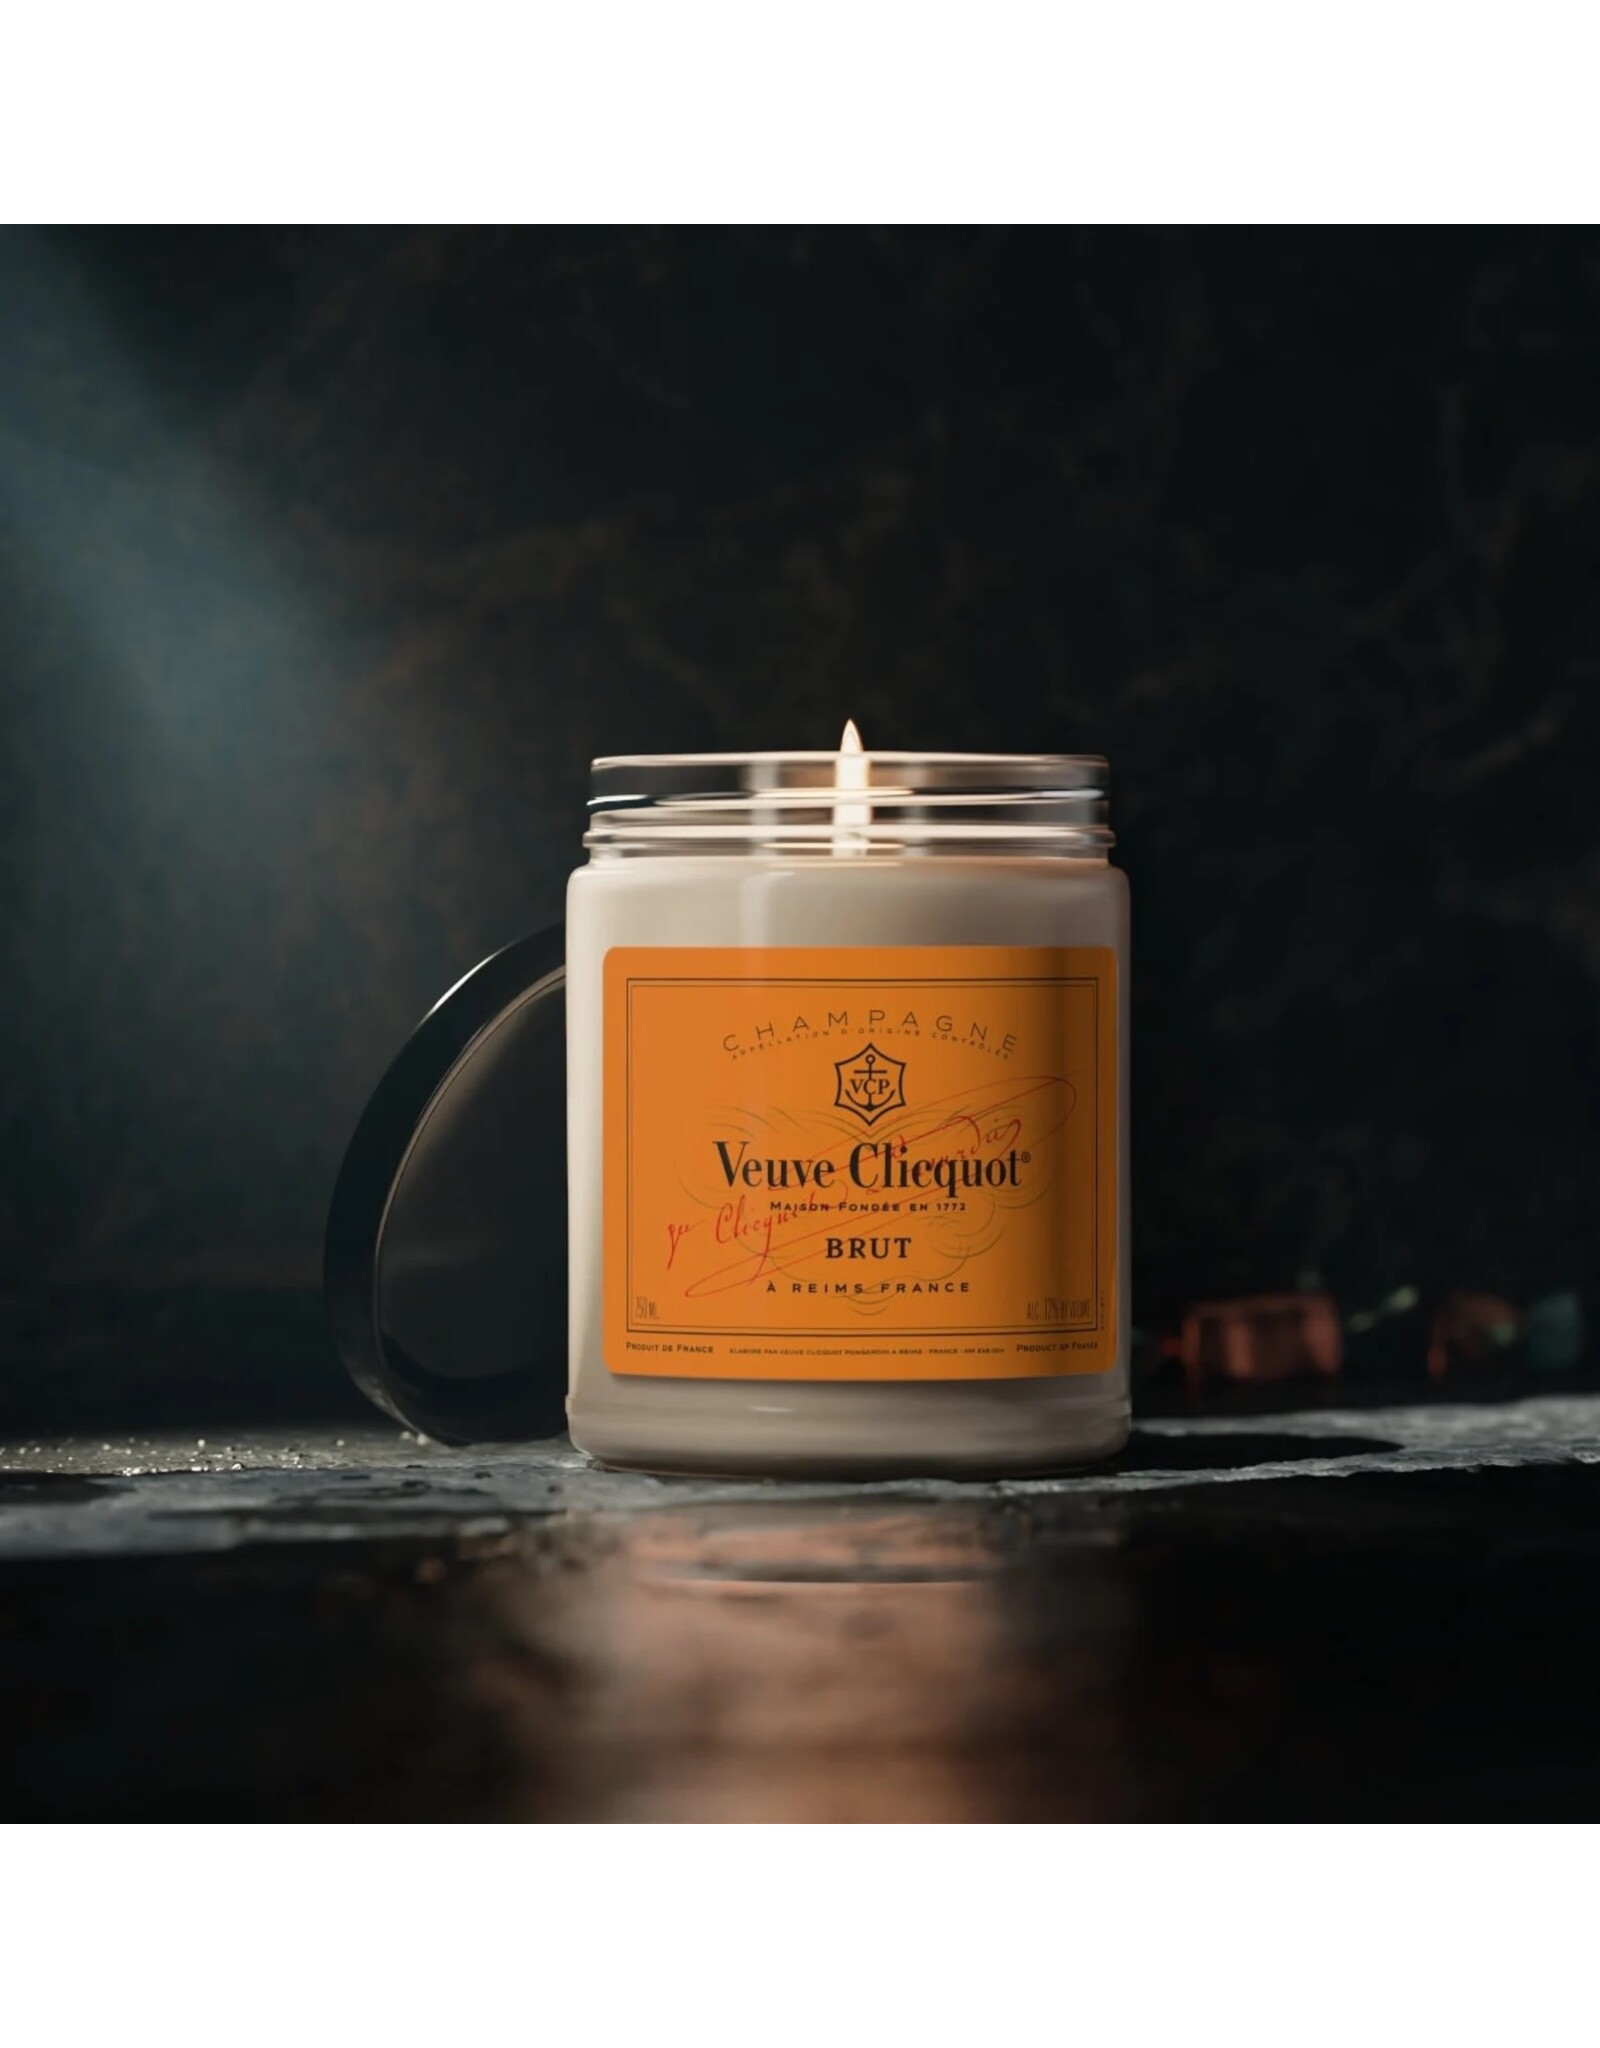 Southern Lights Candle Veuve Clicquot Brut Champagne Candle